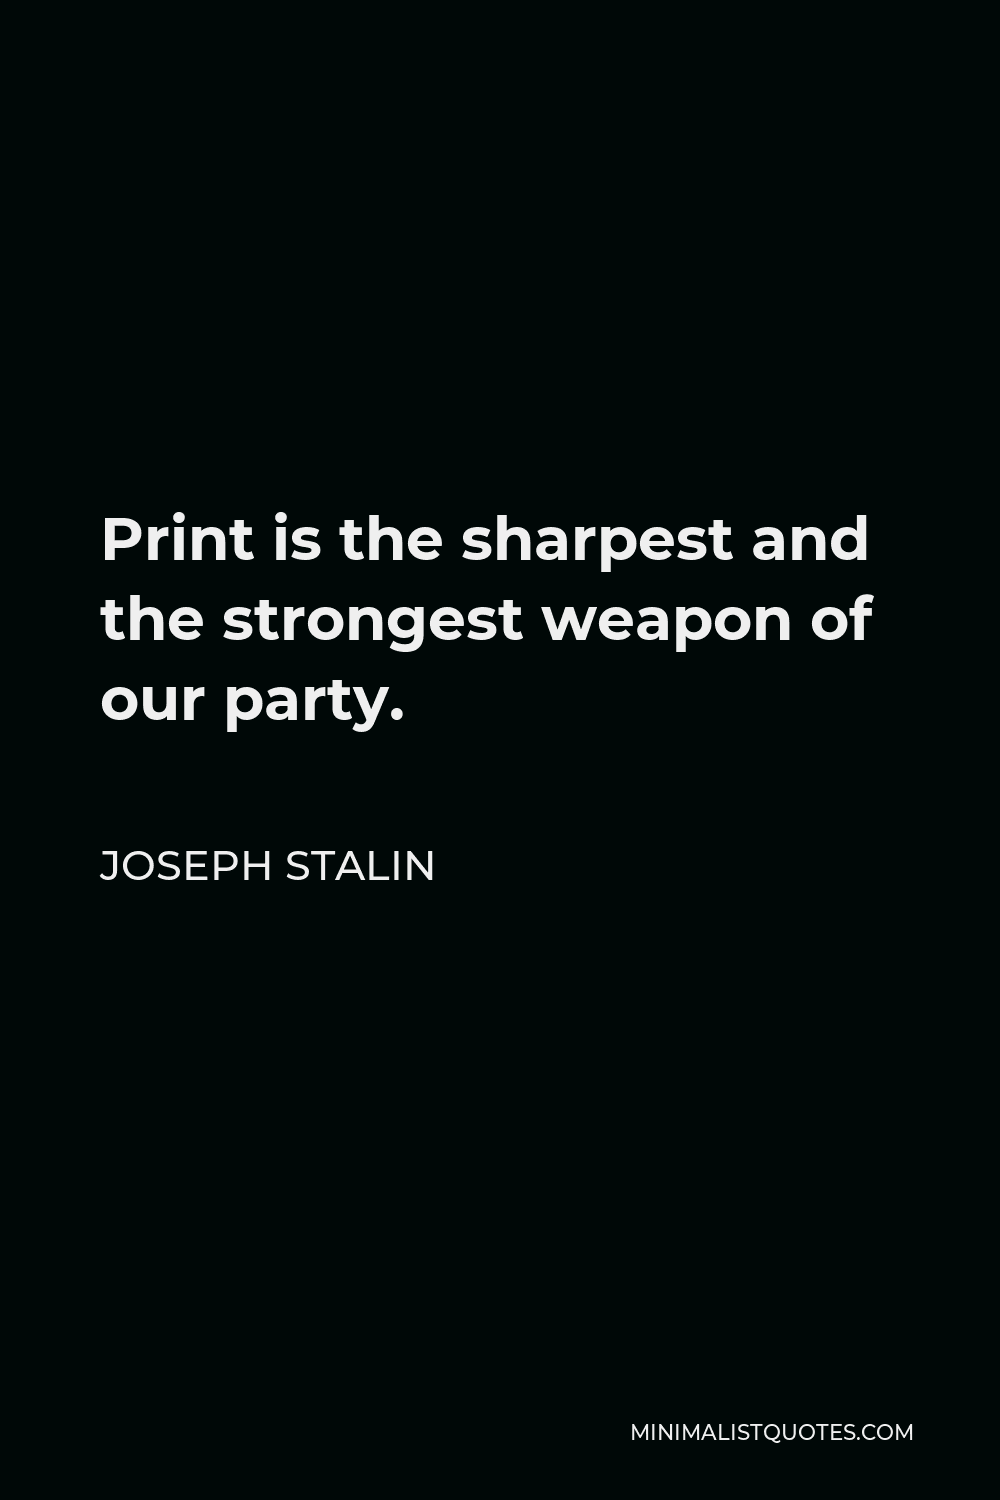 Joseph Stalin Quote - Print is the sharpest and the strongest weapon of our party.